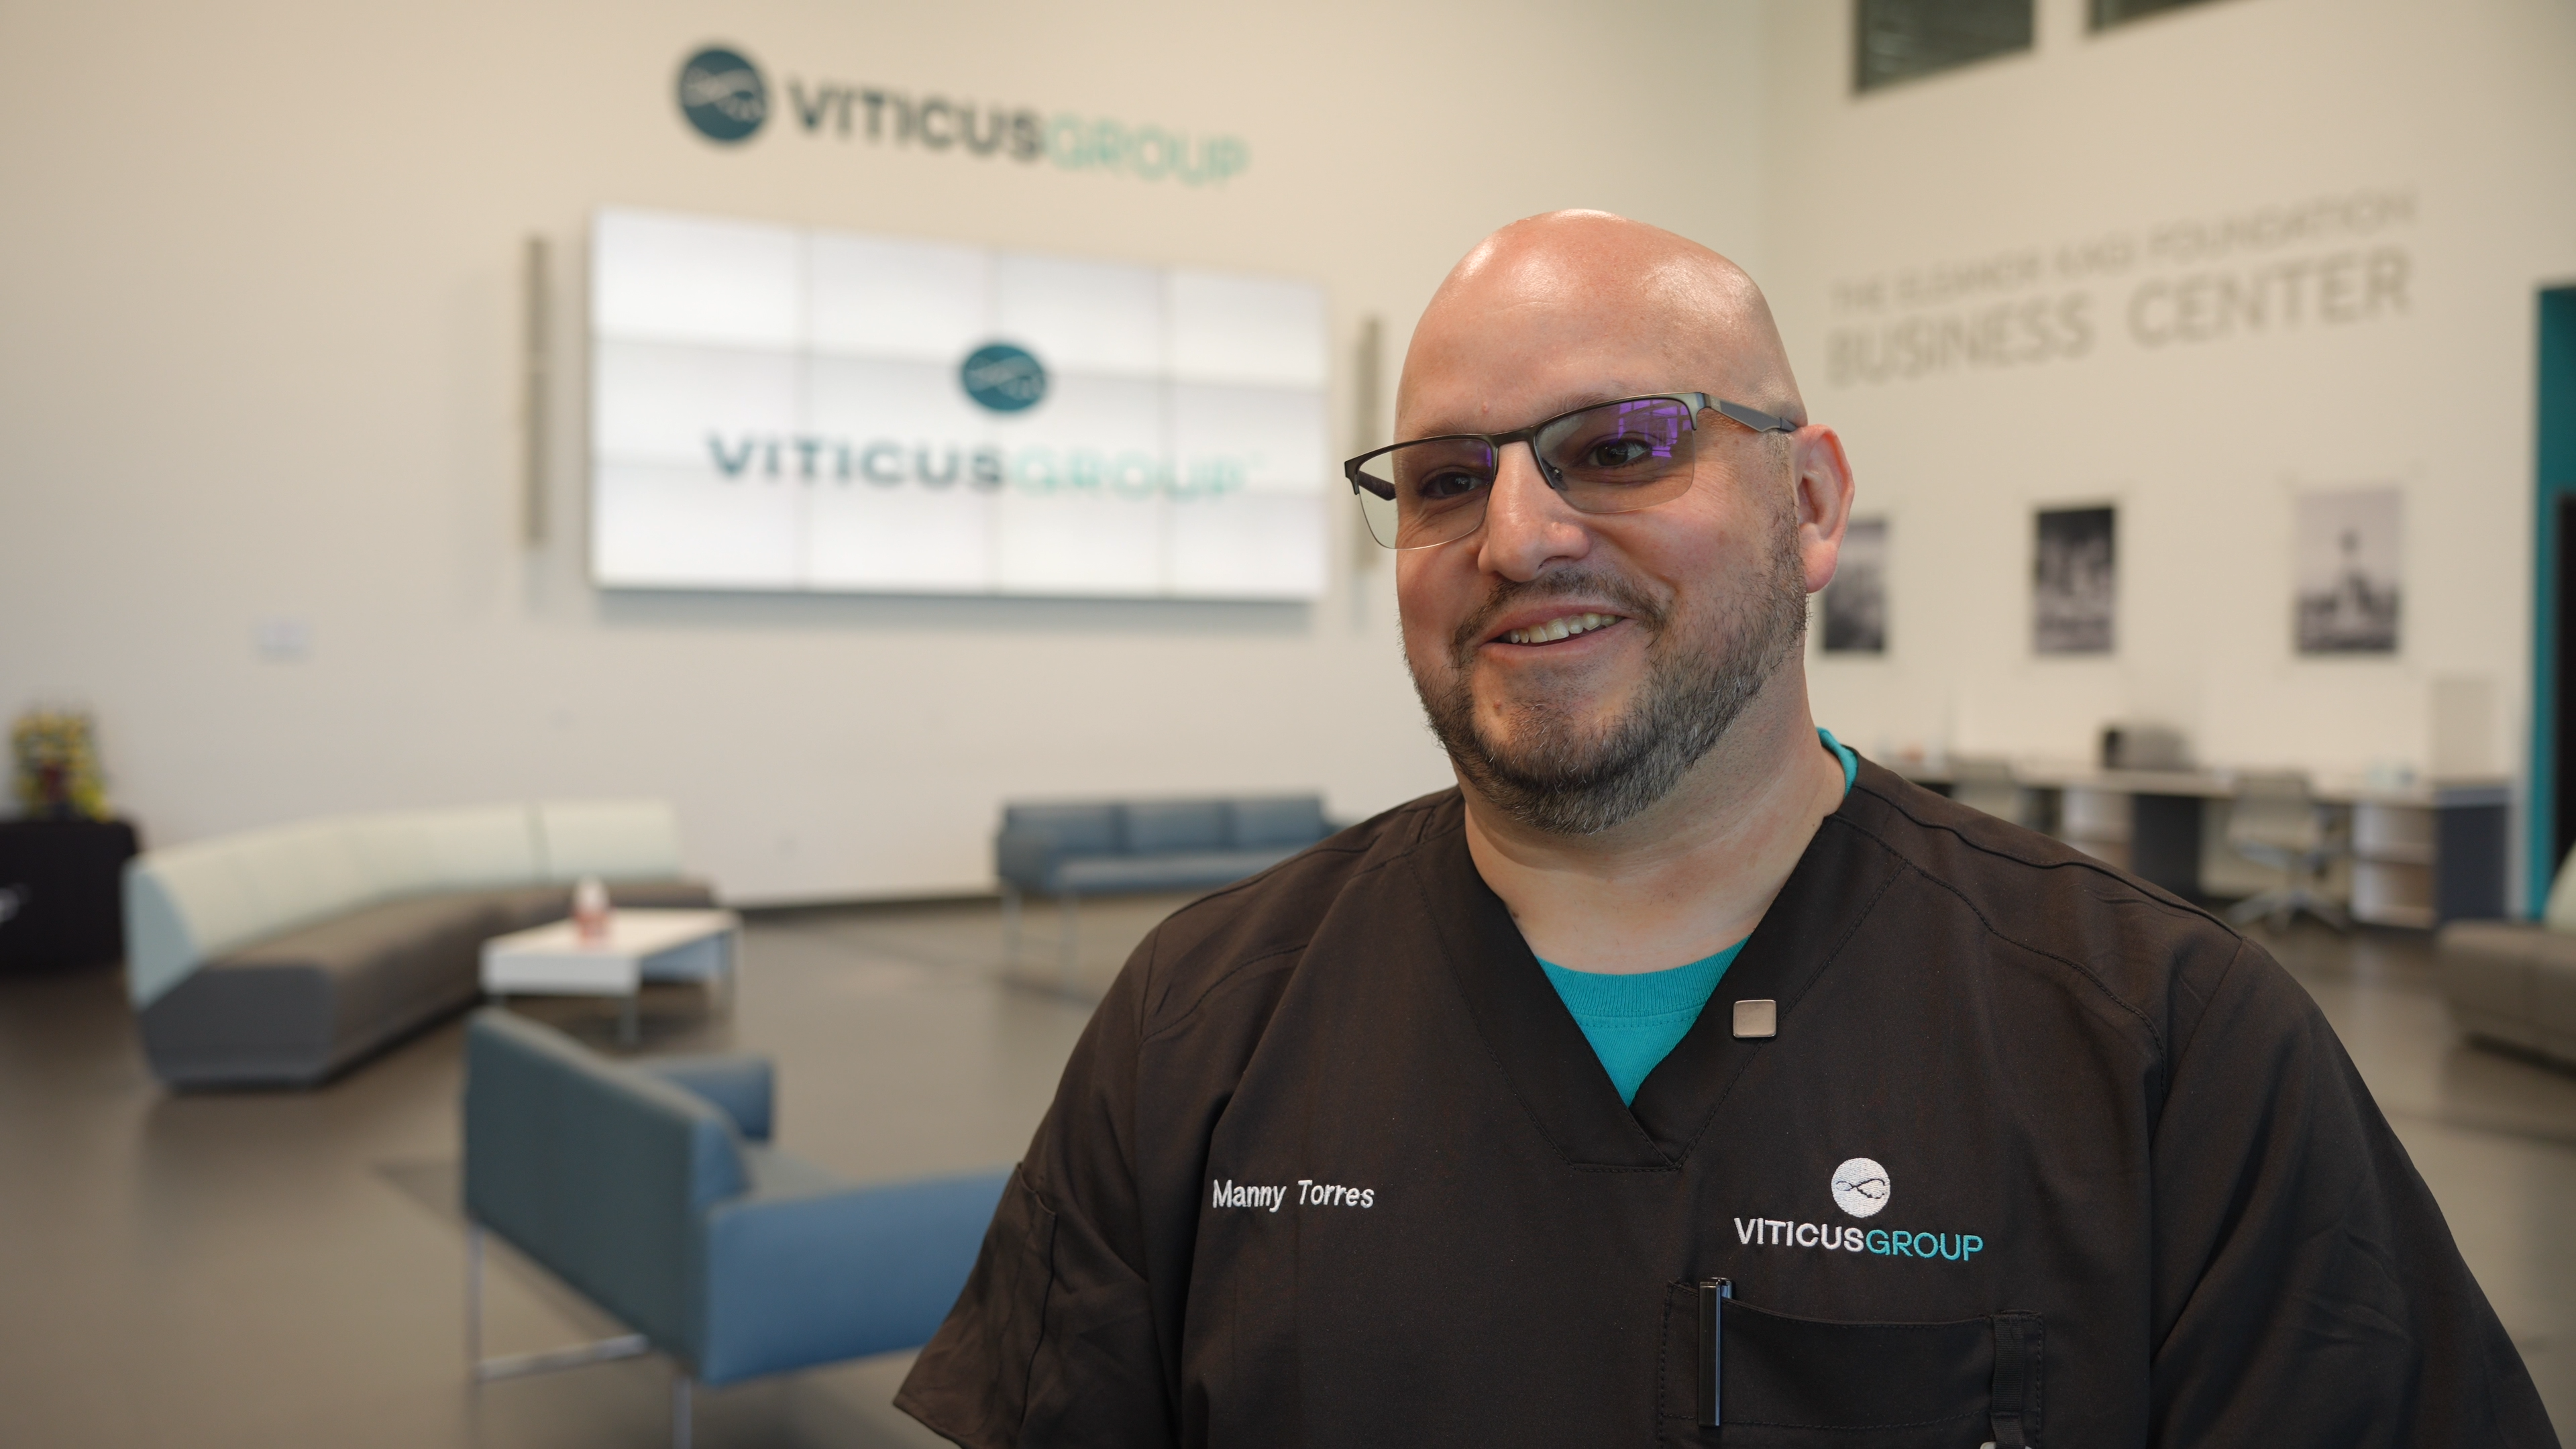 Interview with Manuel Torres, Lead Bioskills Technician at Viticus Group